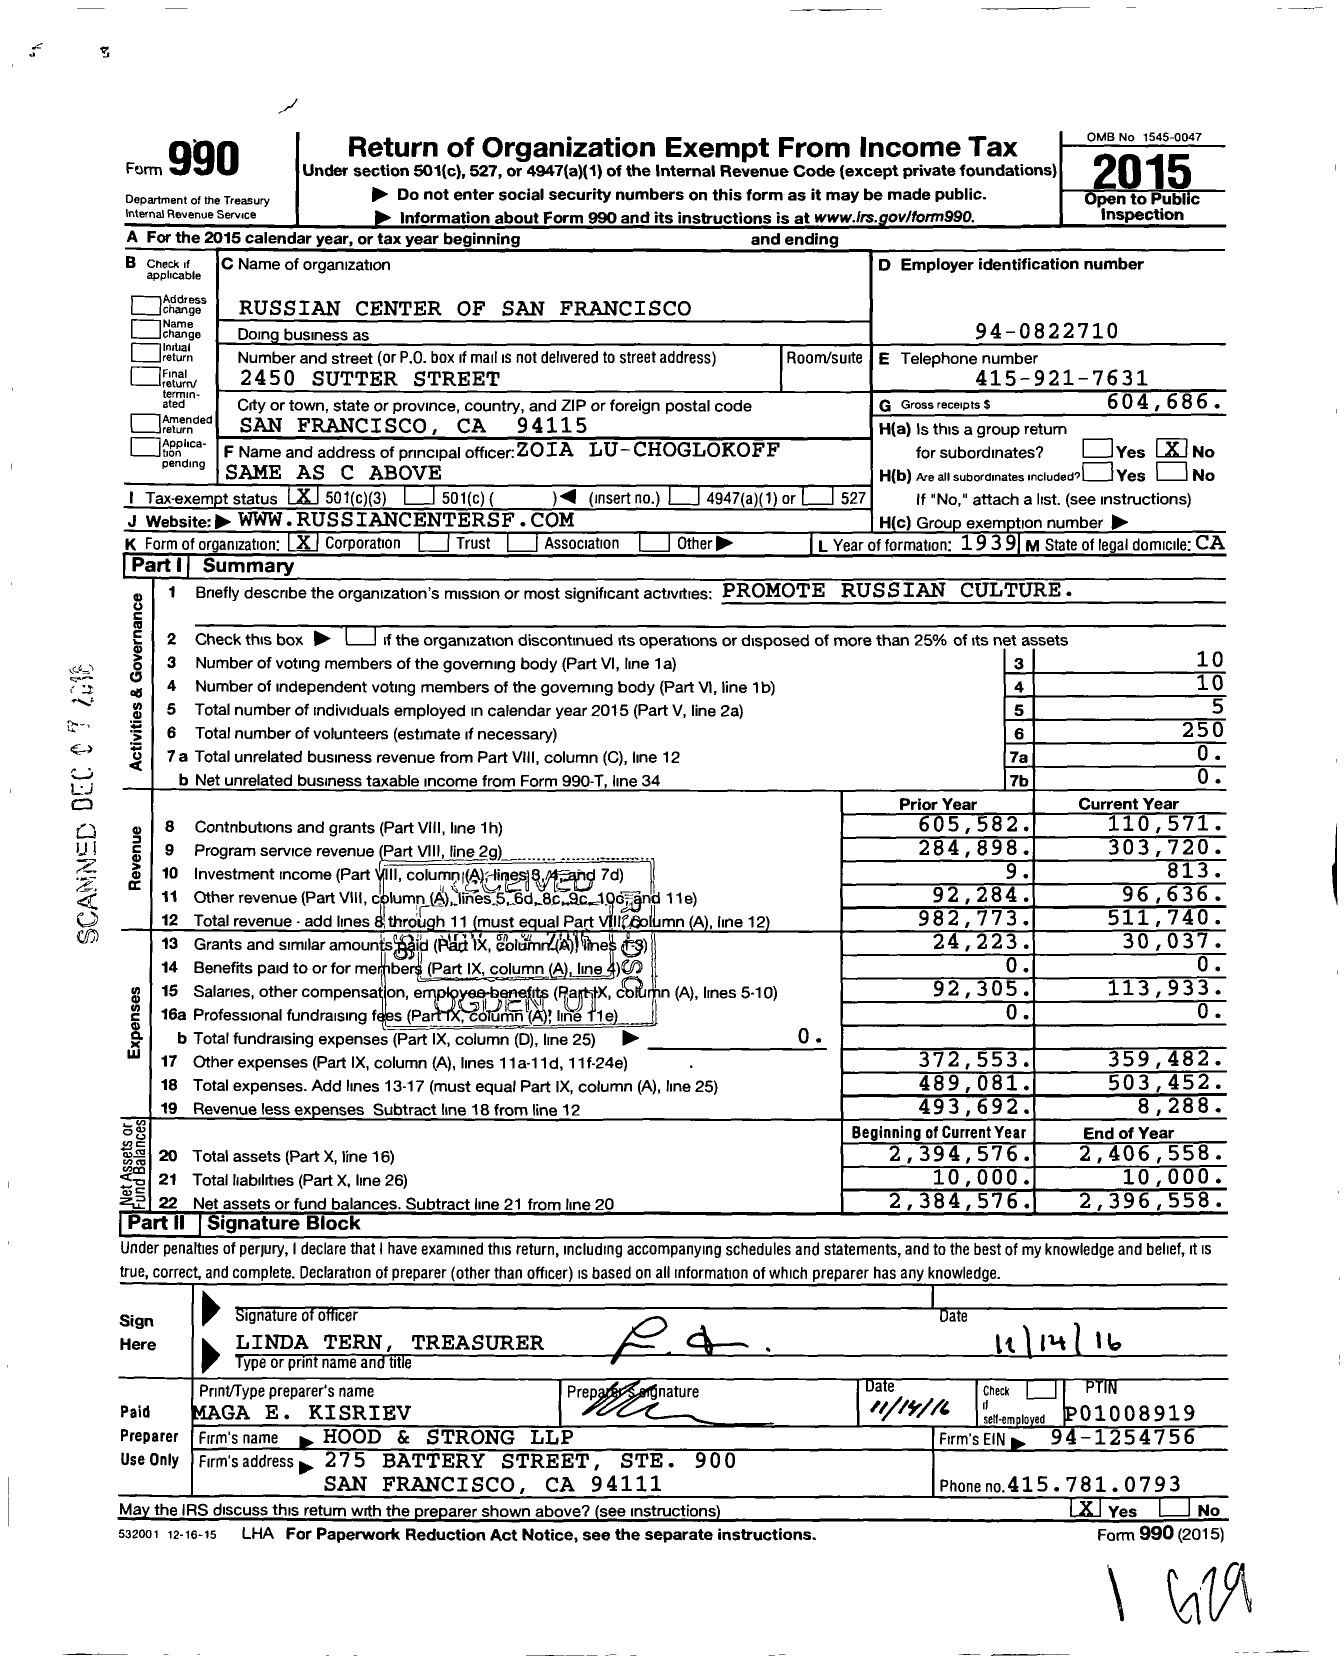 Image of first page of 2015 Form 990 for Russian Center of San Francisco